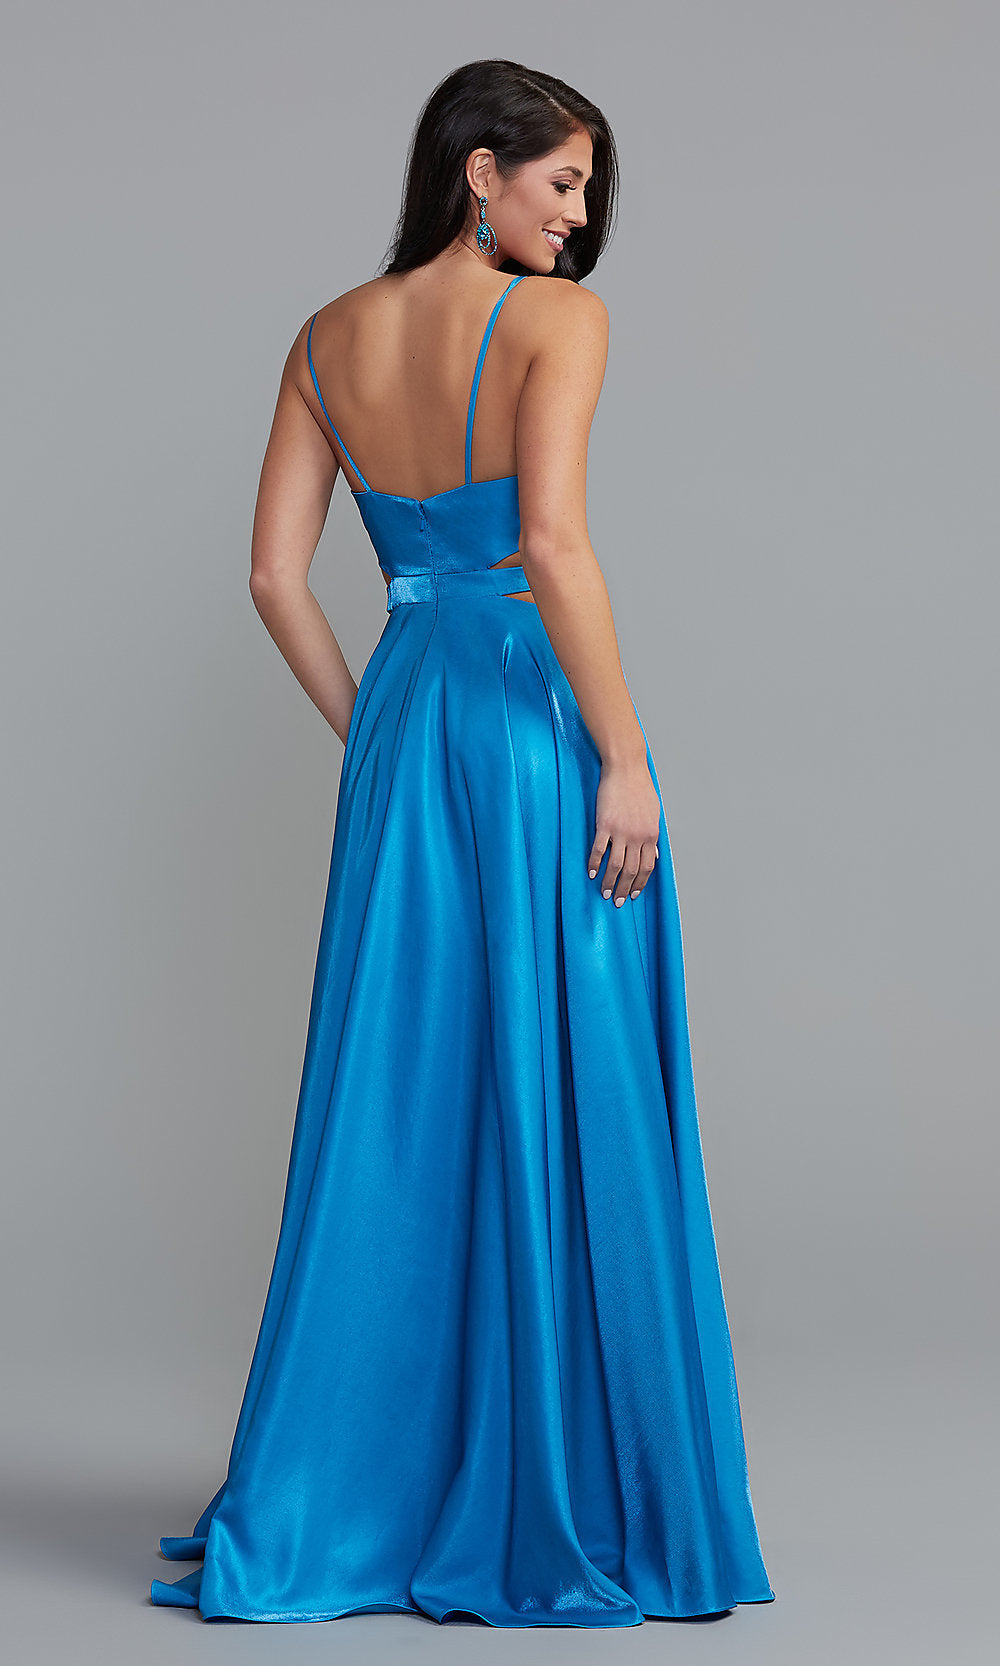  Long Shimmer Formal Prom Dress with Side Cut Outs